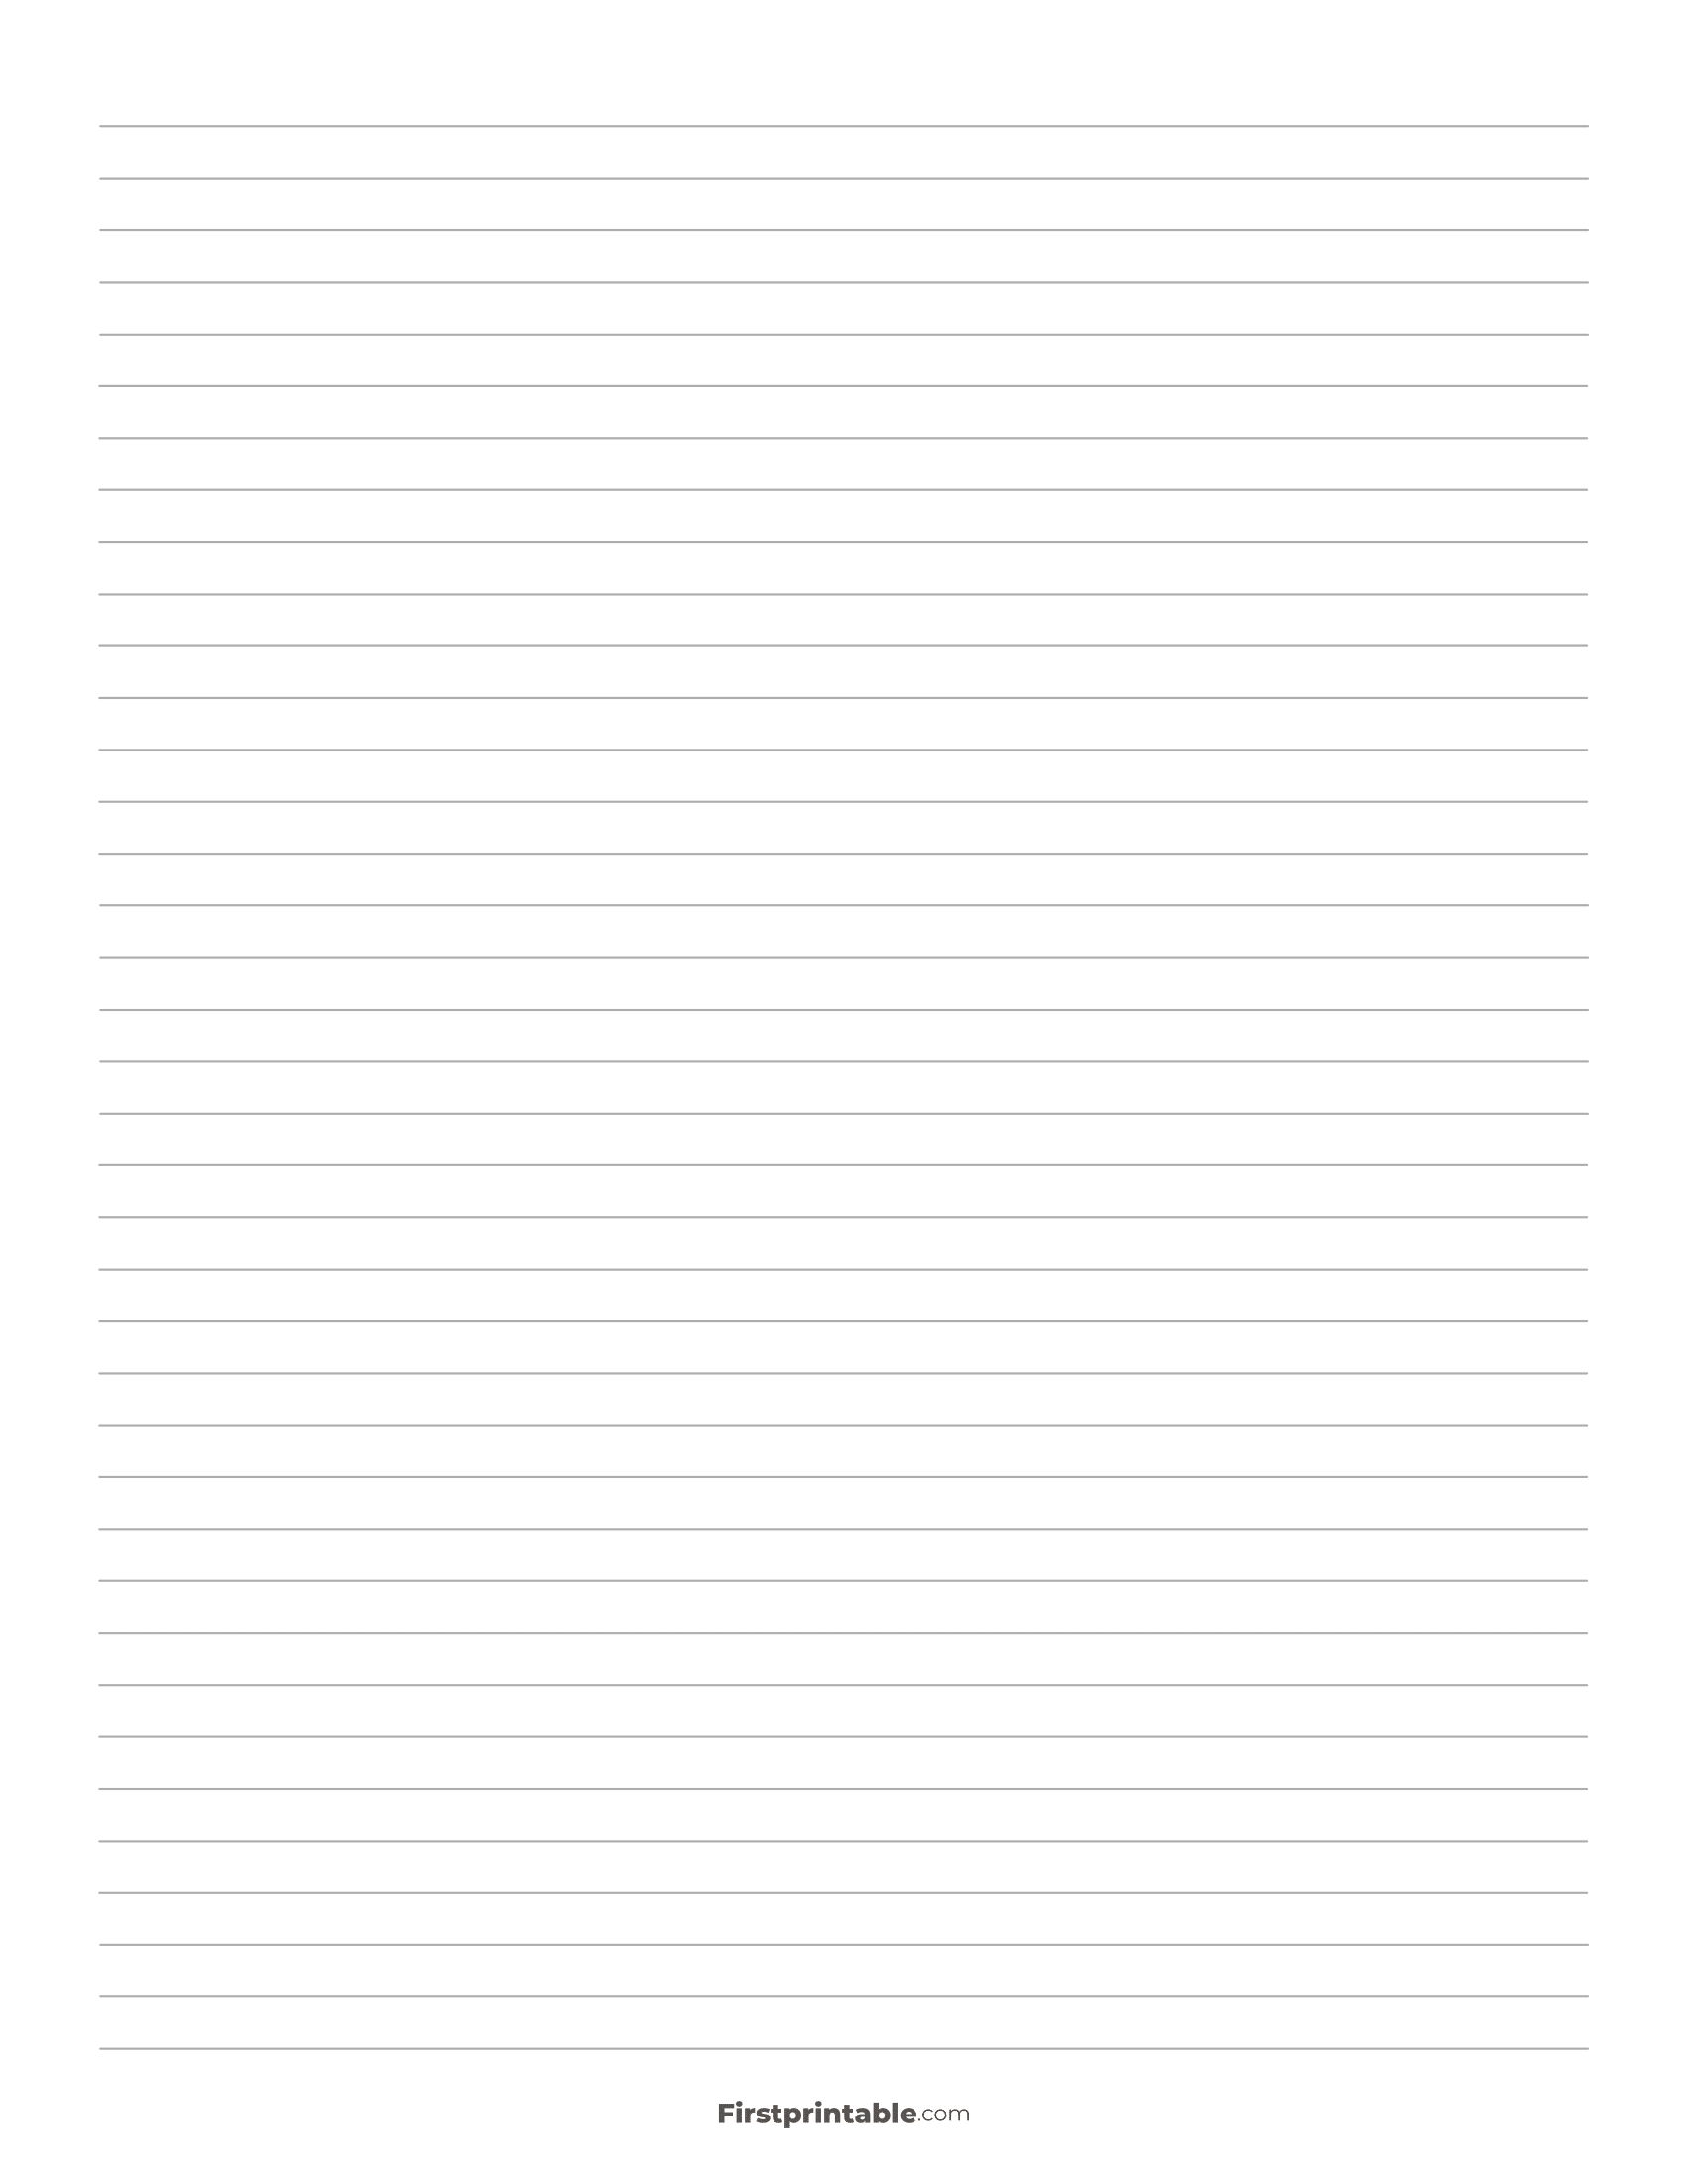 Printable Lined Paper Template - Narrow Ruled